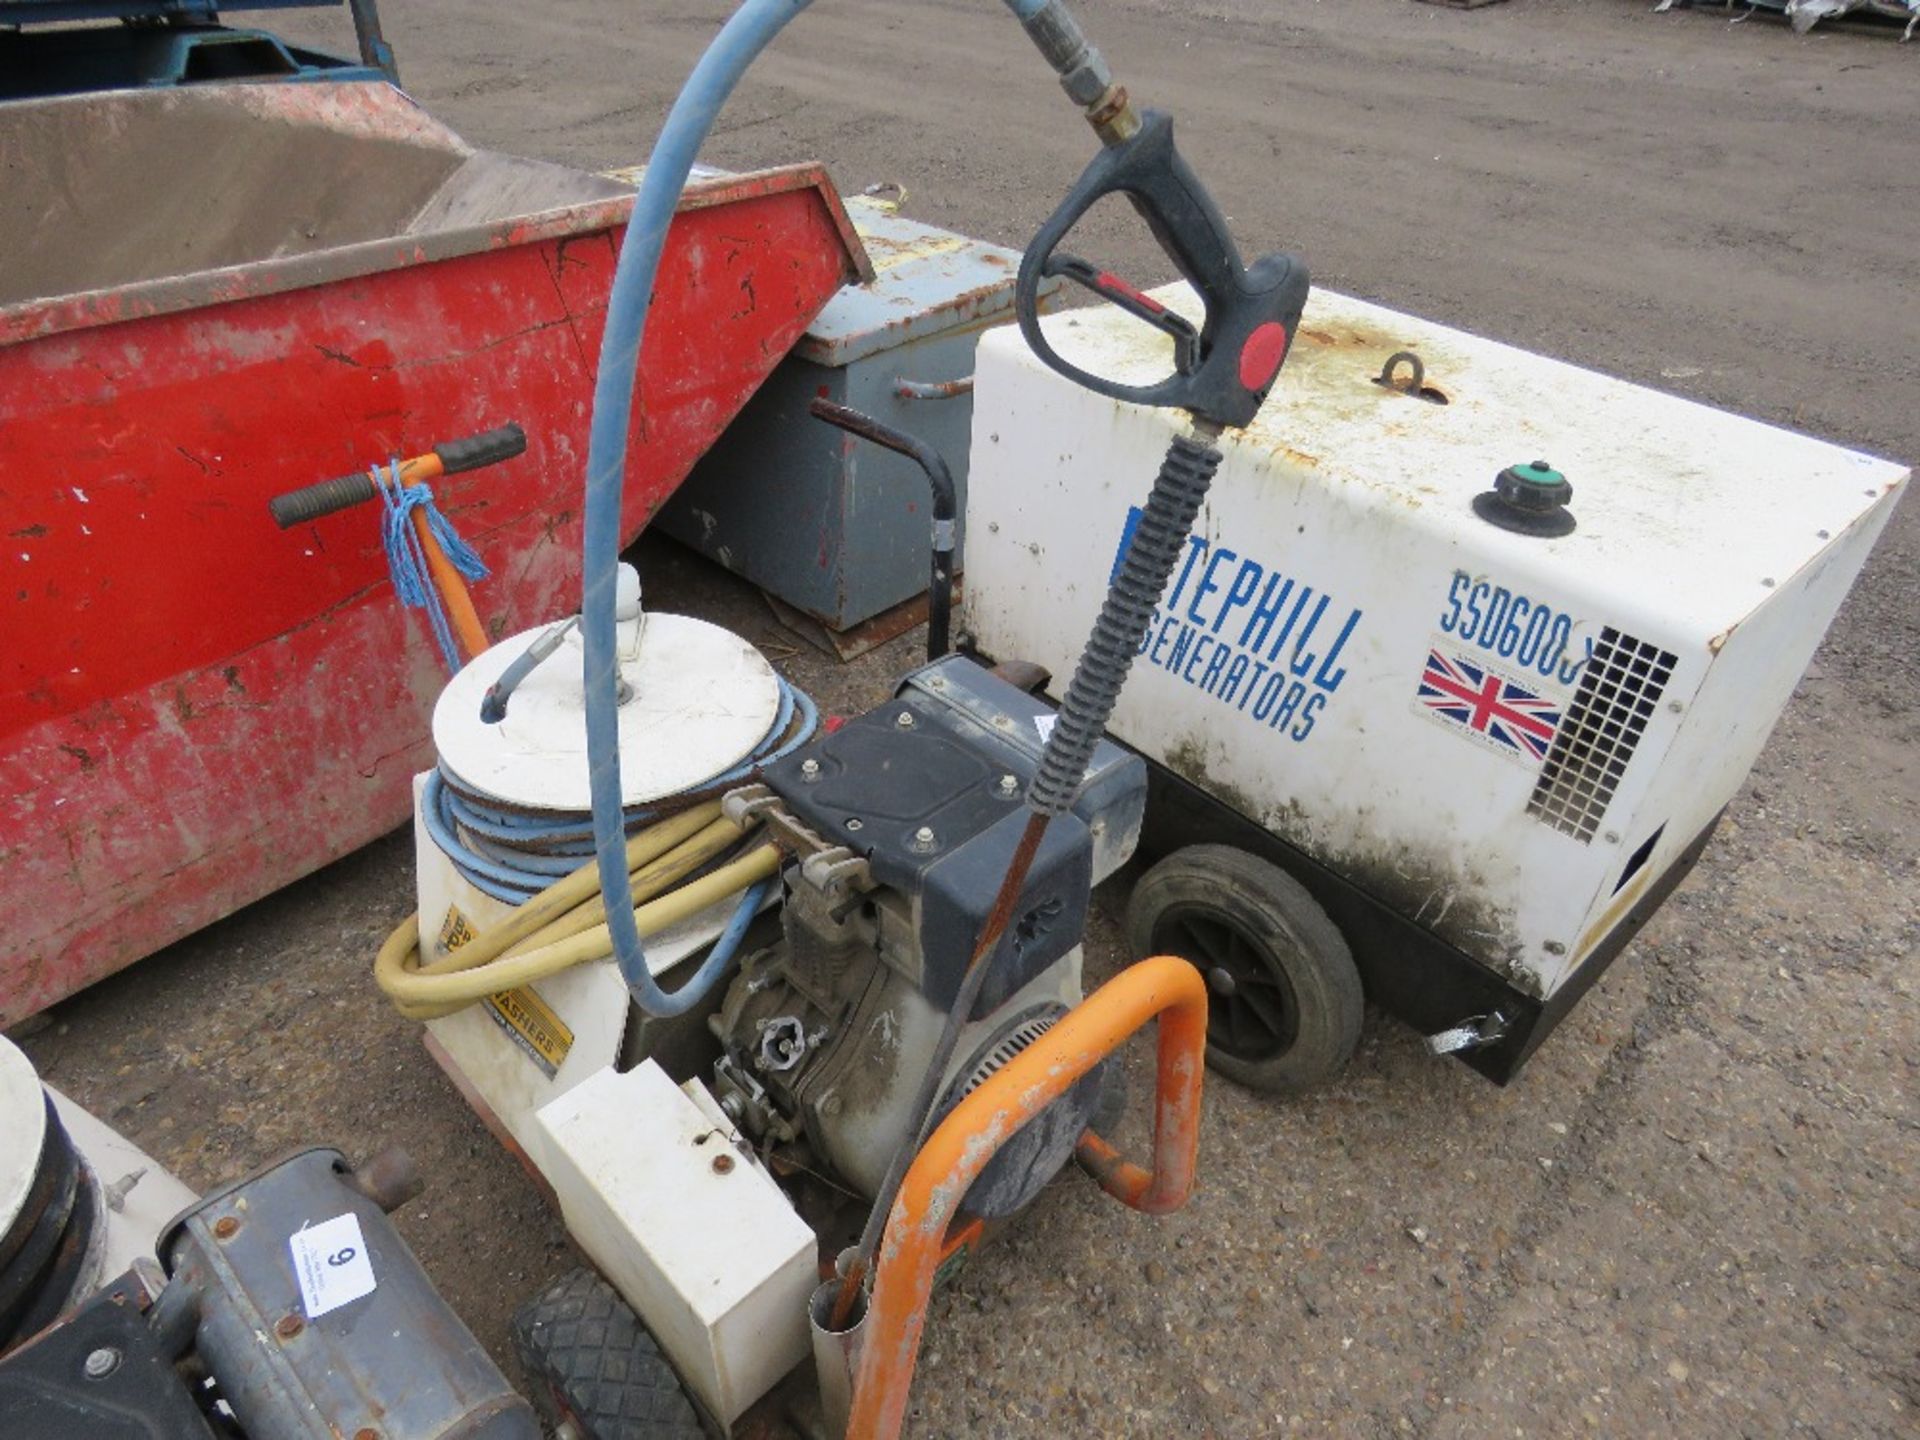 YANMAR ENGINED BRENDON POWER WASHER WITH HOSE AND LANCE. - Image 2 of 4